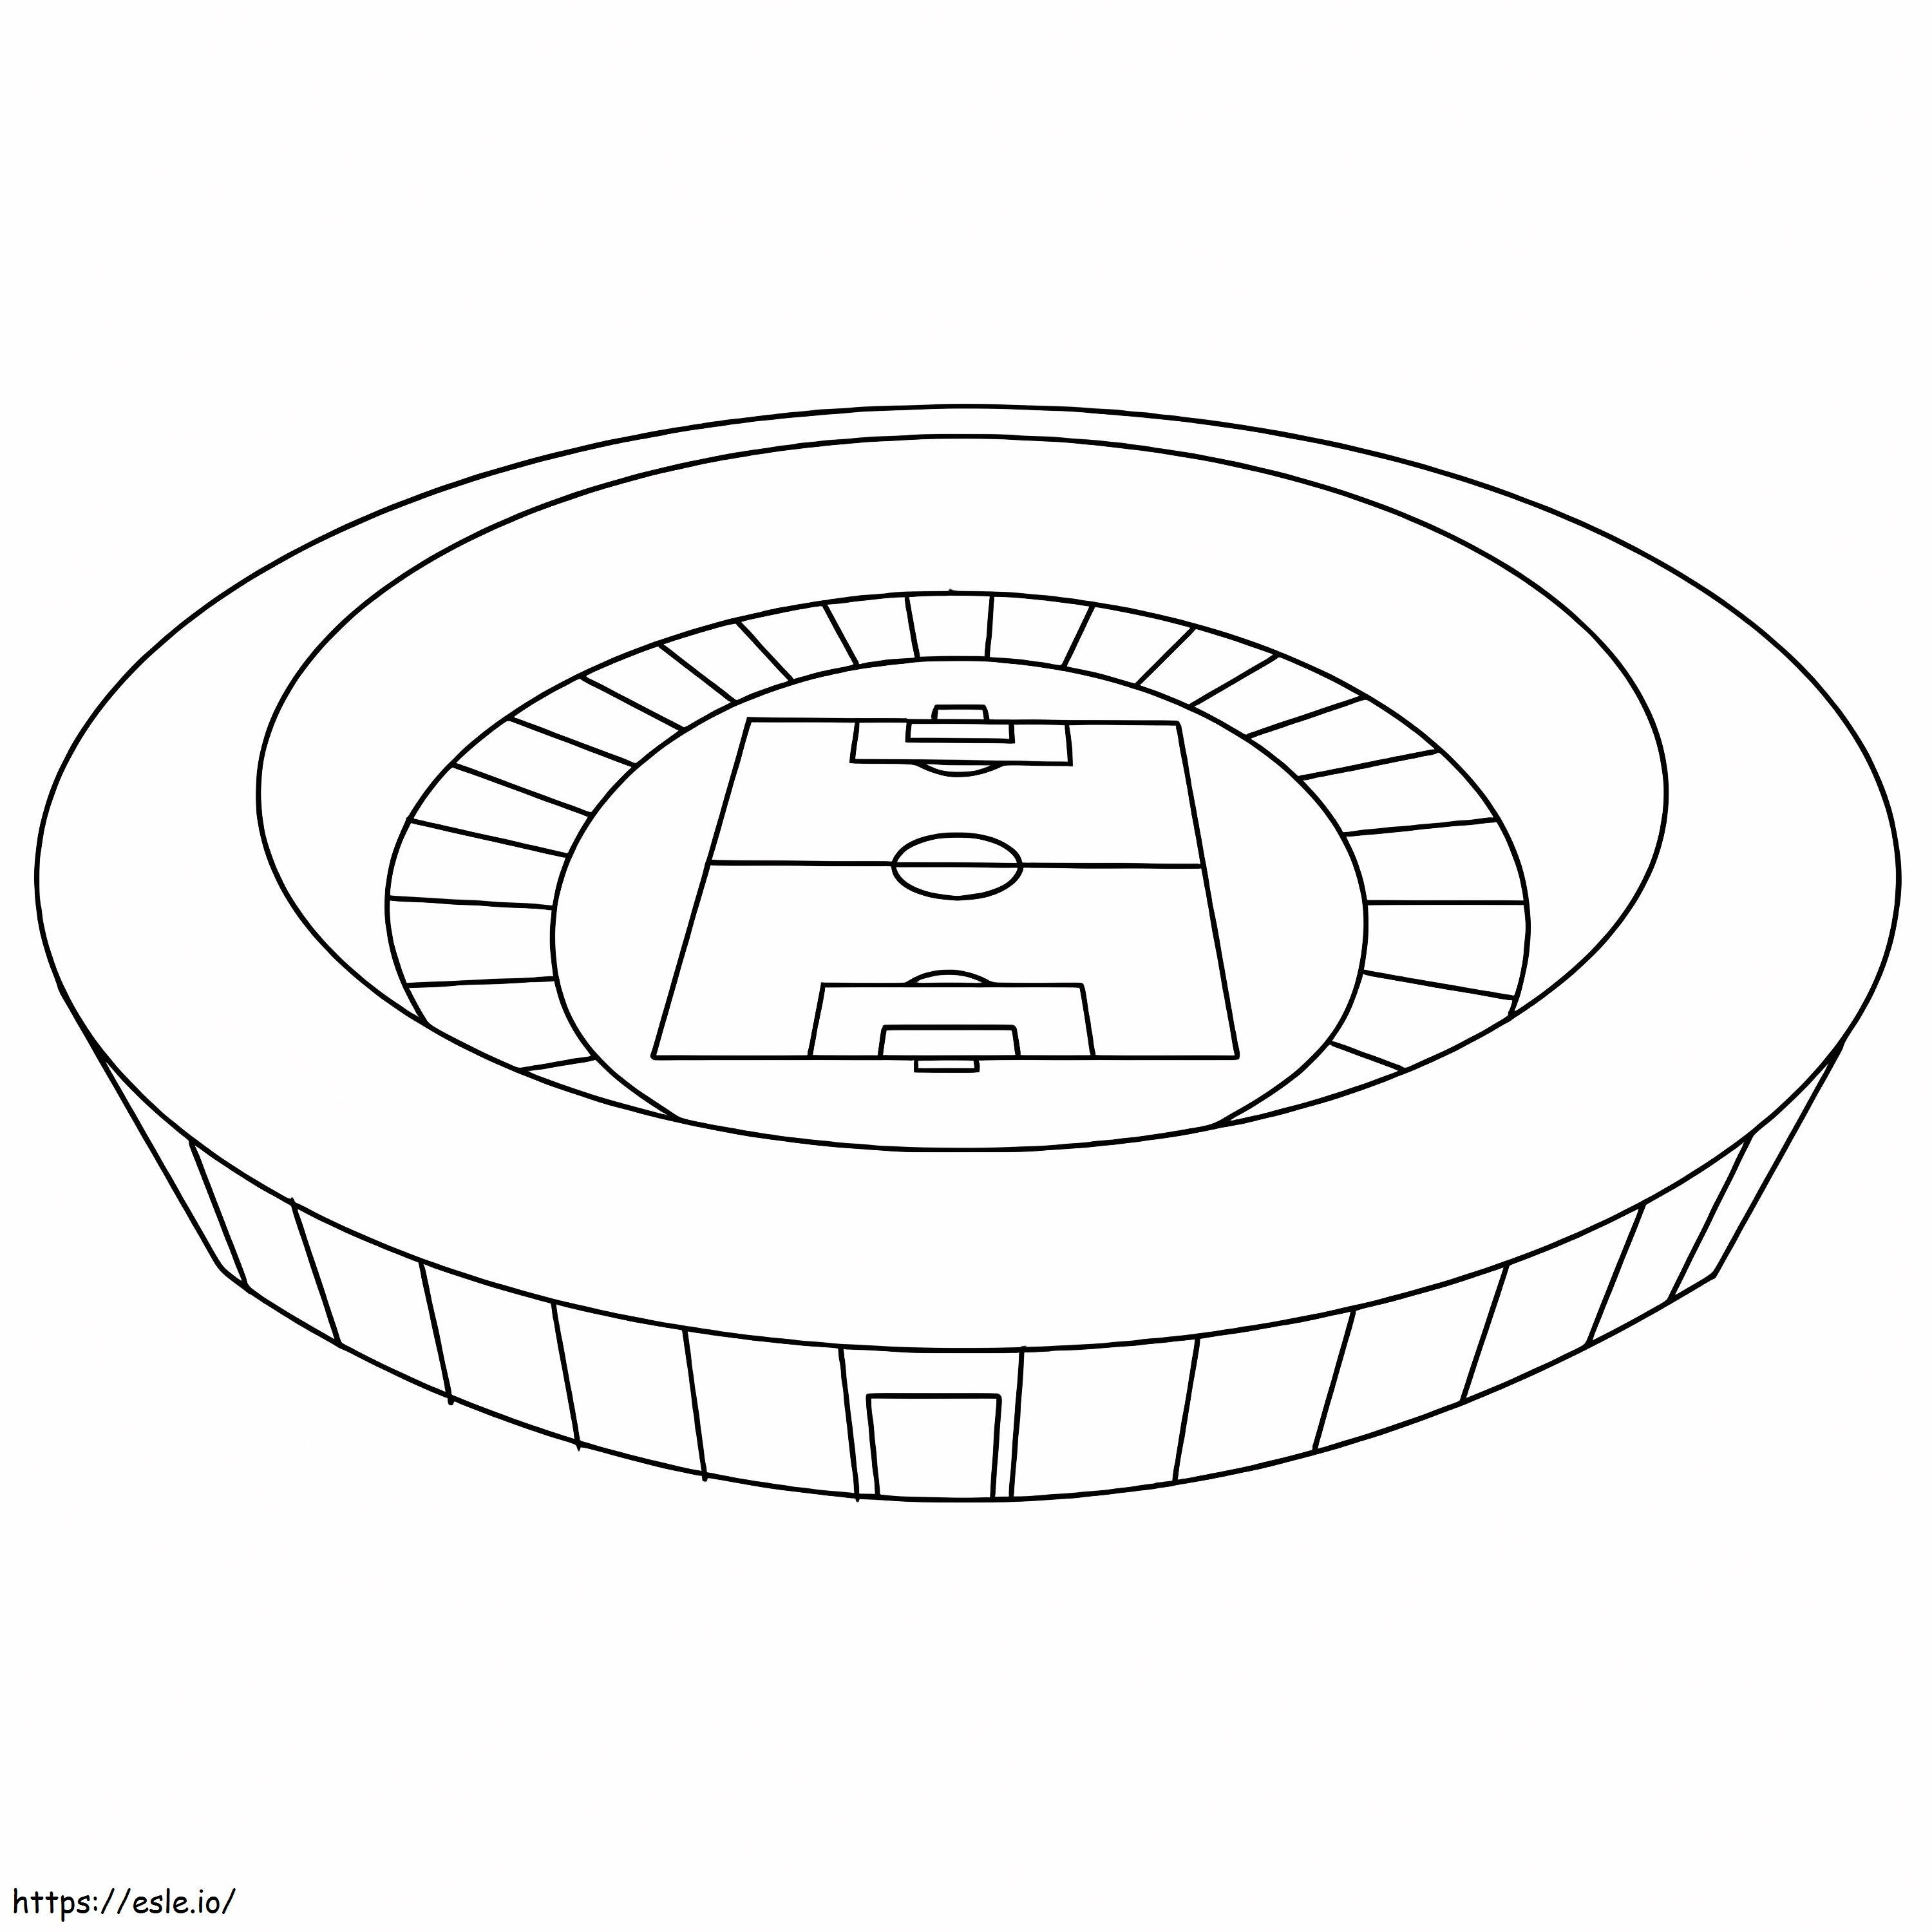 Simple Stadium coloring page